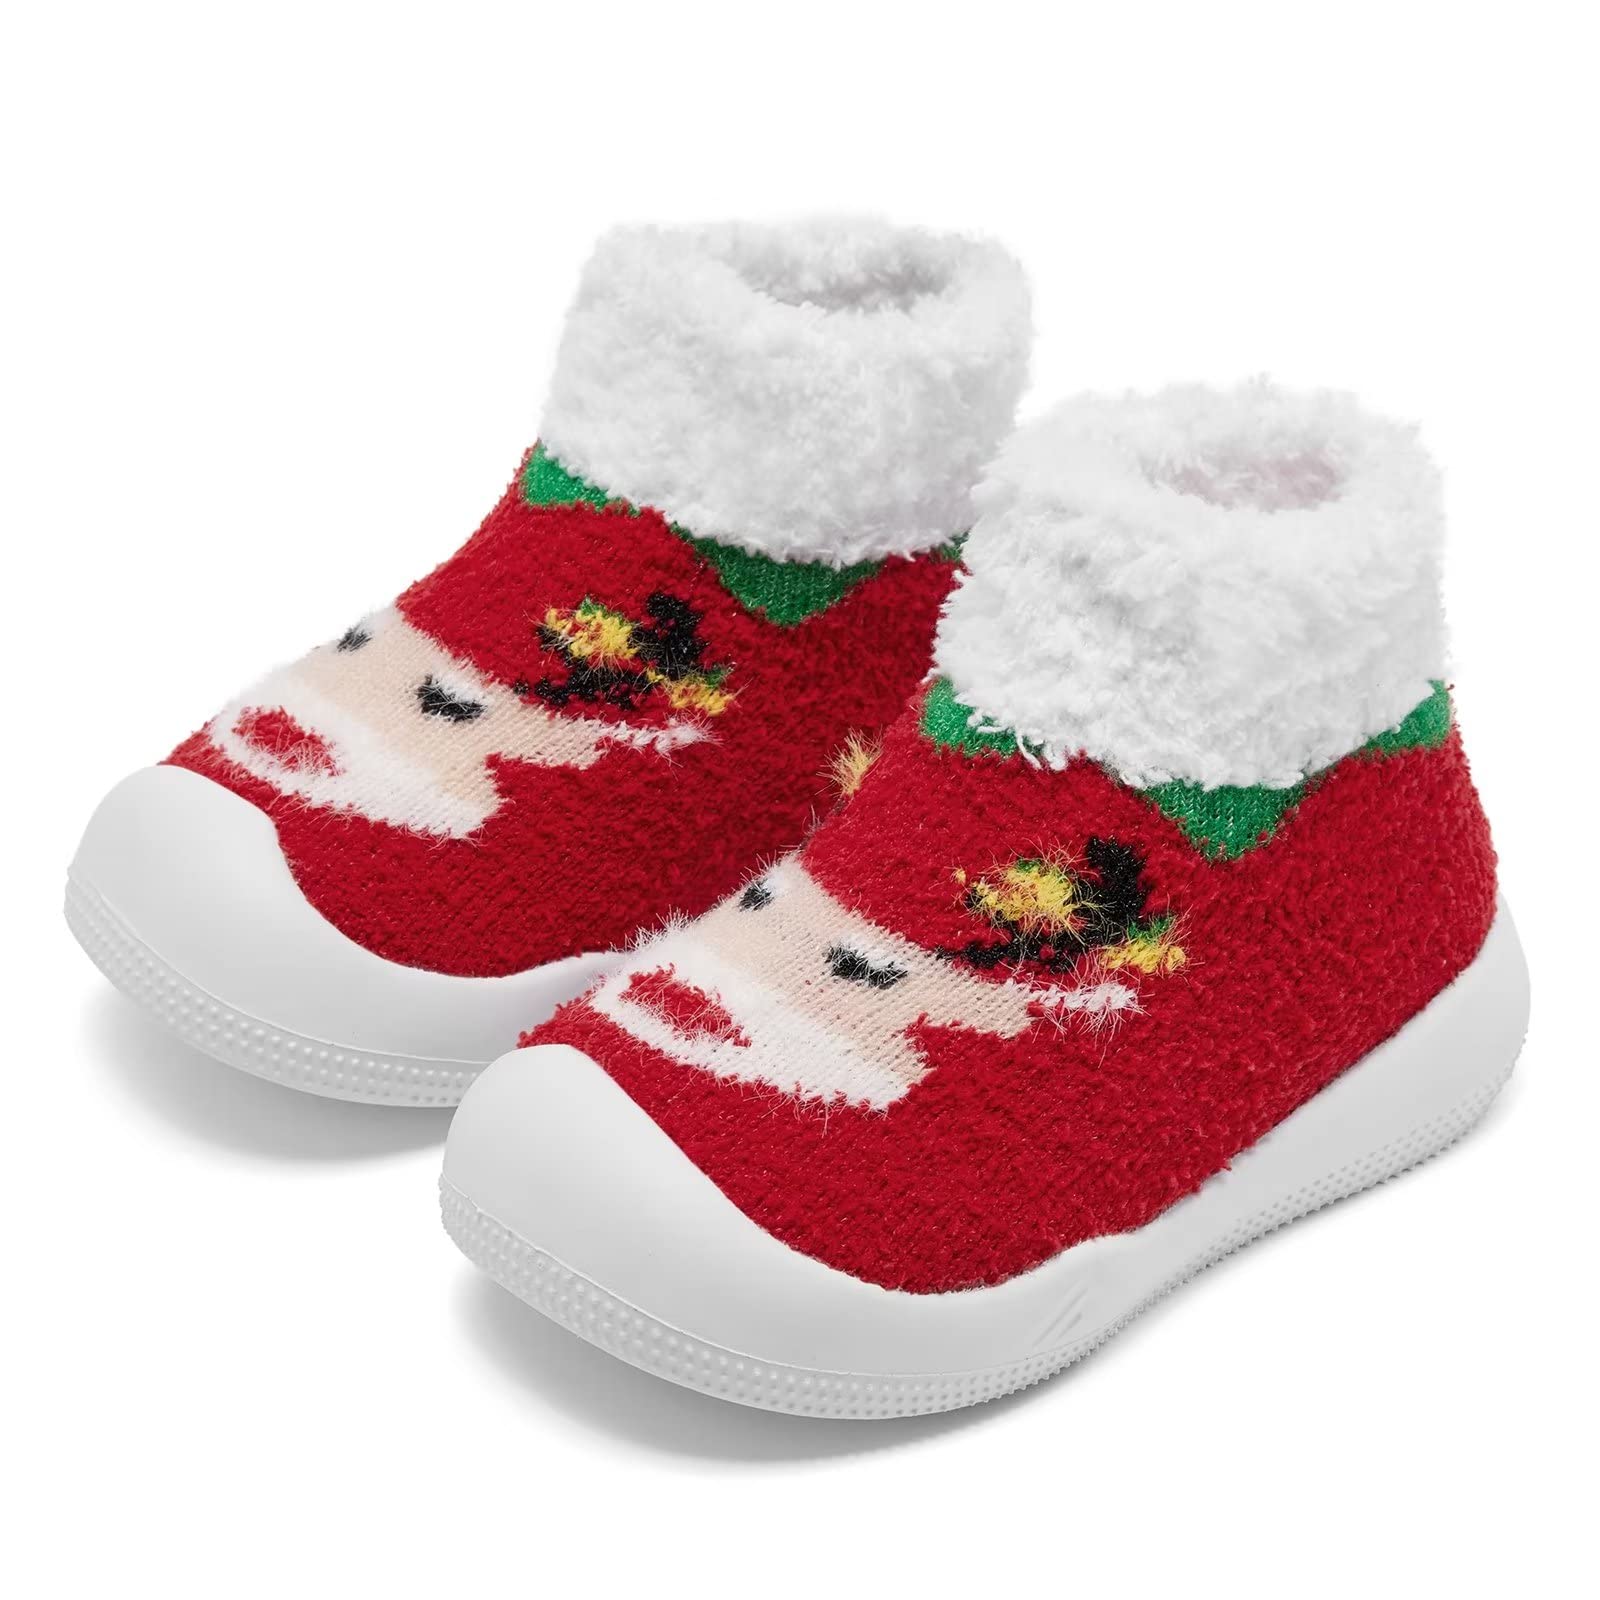 Eashi christmas Baby Shoes girls Boys Warm Baby Winter Shoes cozy Fleece Booties Fuzzy Sock Shoes with Soft Rubber Sole Infant Sneaker